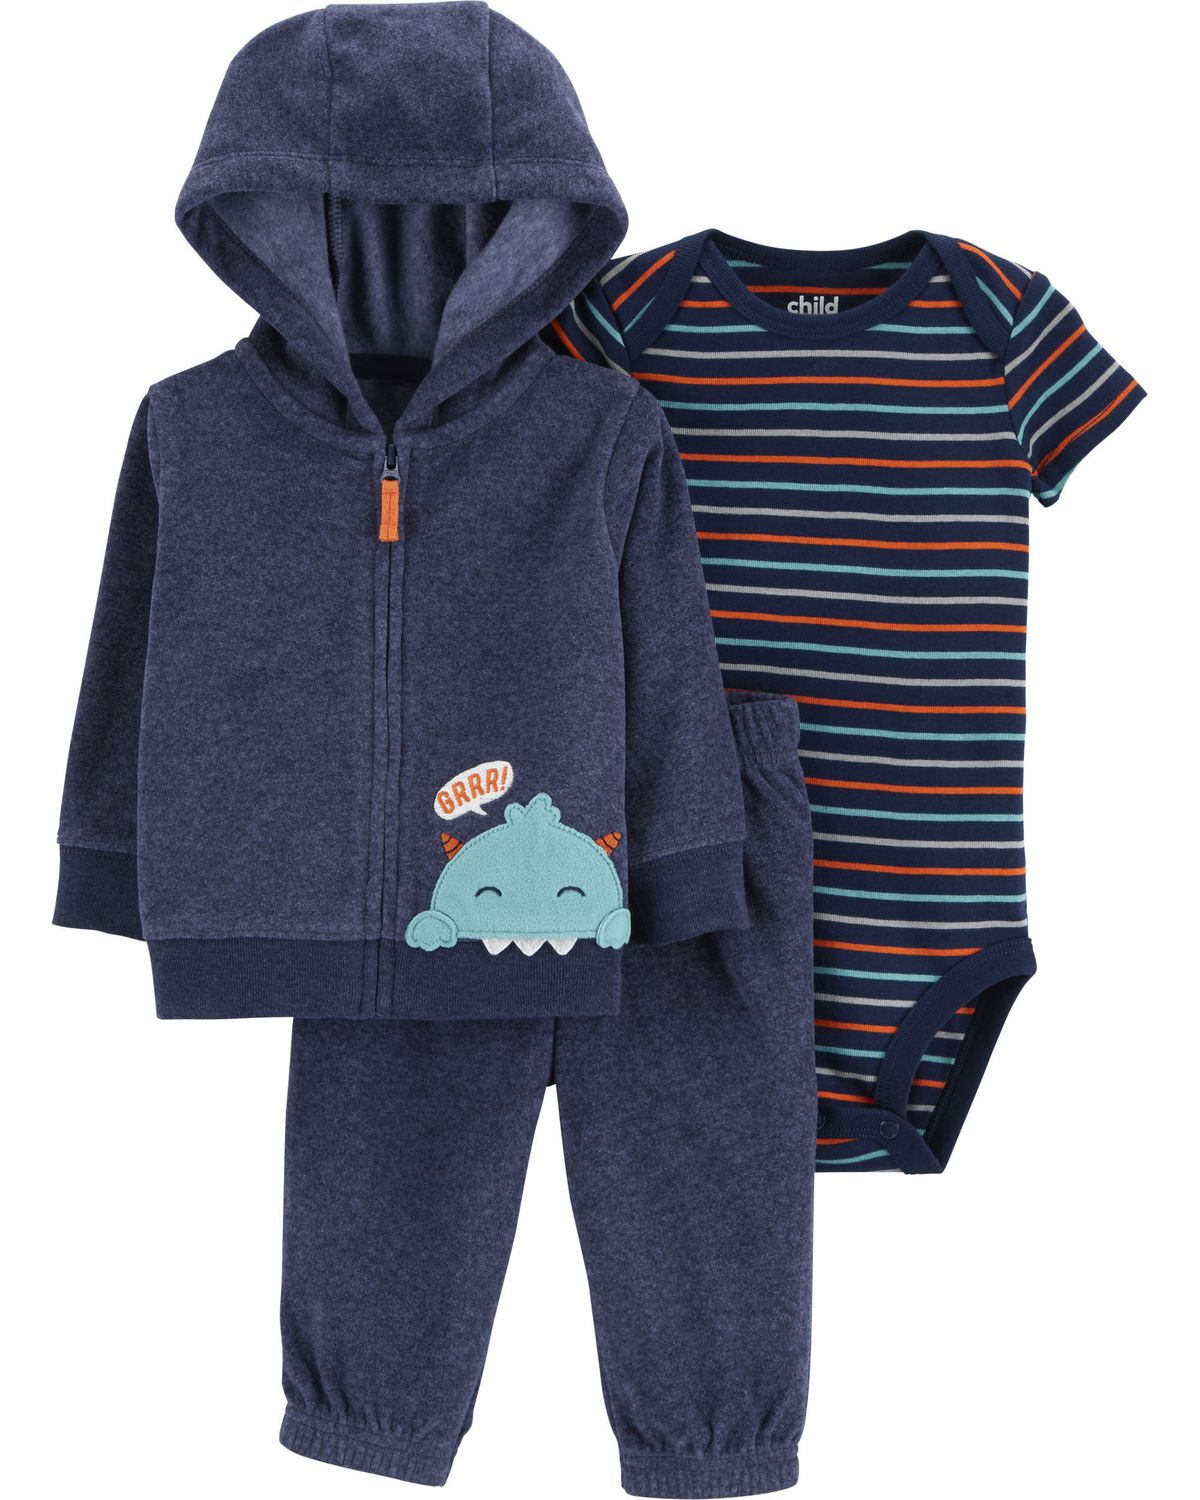 Child of Mine made by Carter's Infant Boys 3pc Clothing set Monster Walmart Canada